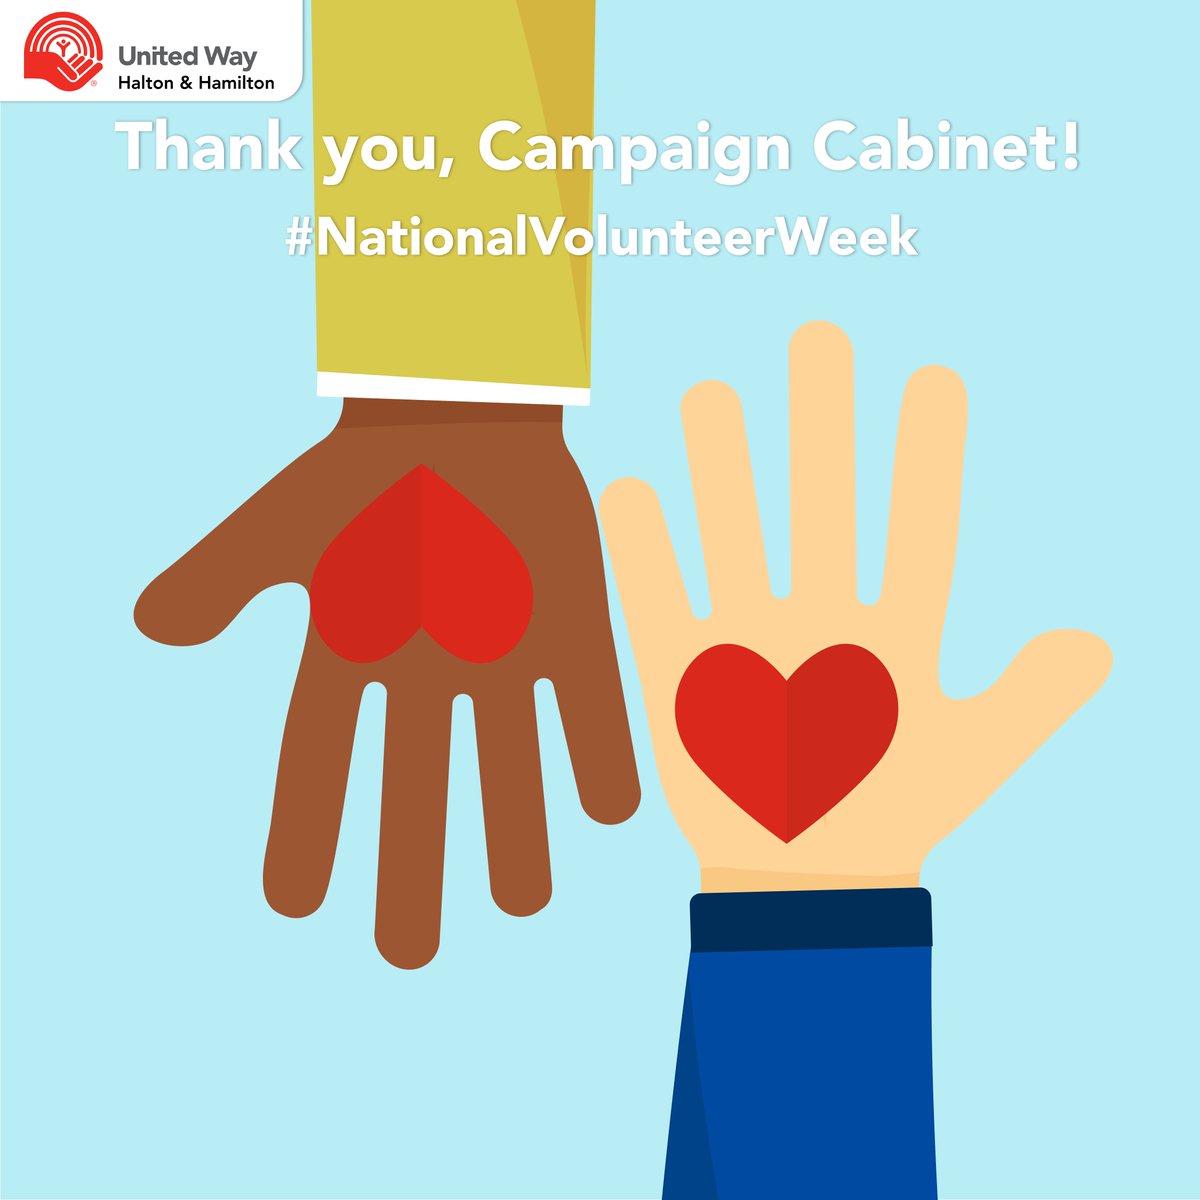 Our Campaign Cabinet members are truly exceptional! They collaborate as a dedicated network of leaders to create a profound impact for those in need.

Your #LocalLove is creating positive change! Thank you for everything that you do. 

#NationalVolunteerWeek